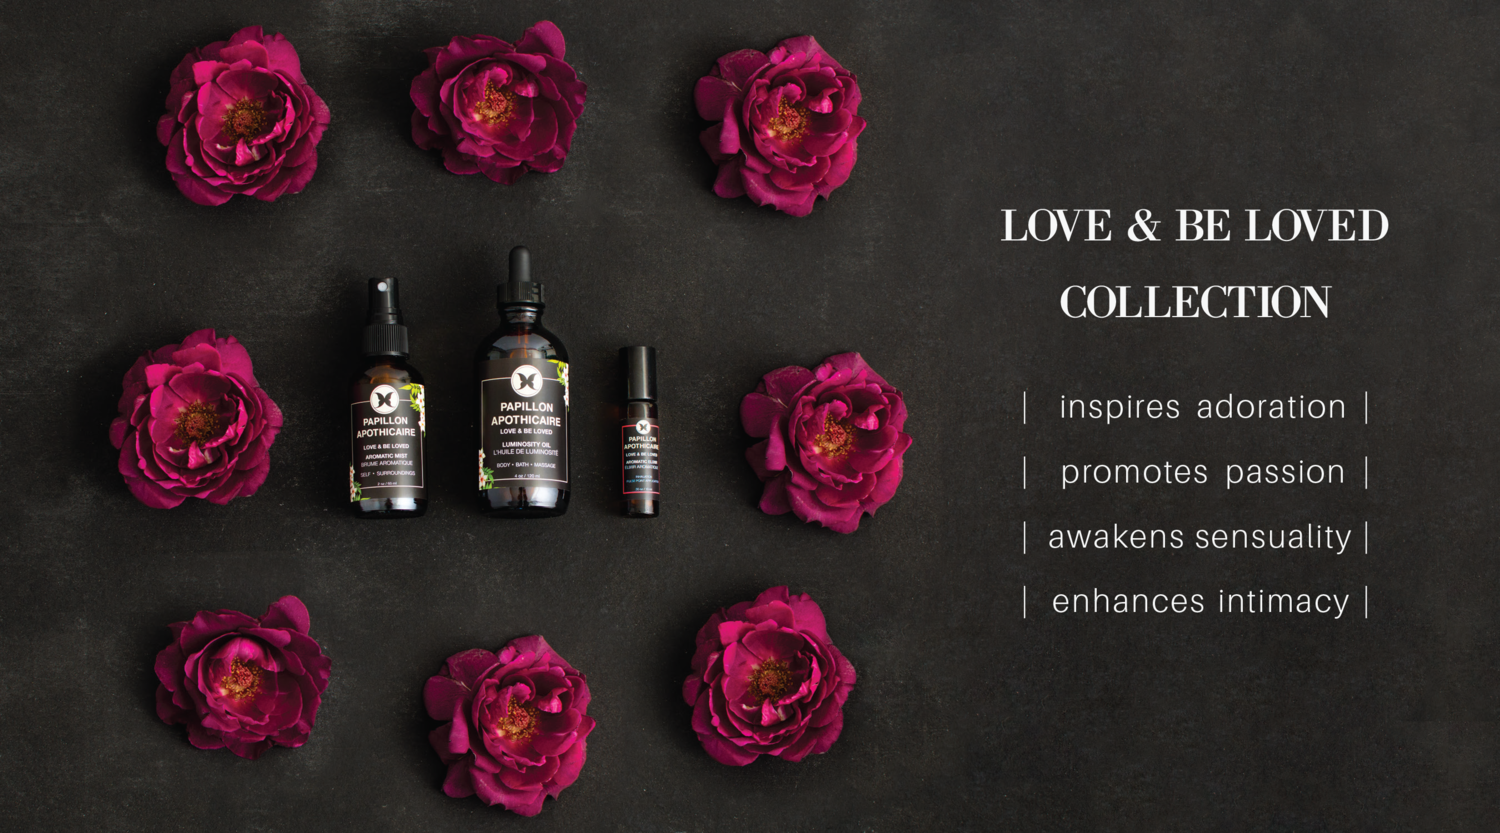 papillon-apothicaire-love-and-be-loved-aphrodisiac-organic-aromatherapy-collection-with-roses